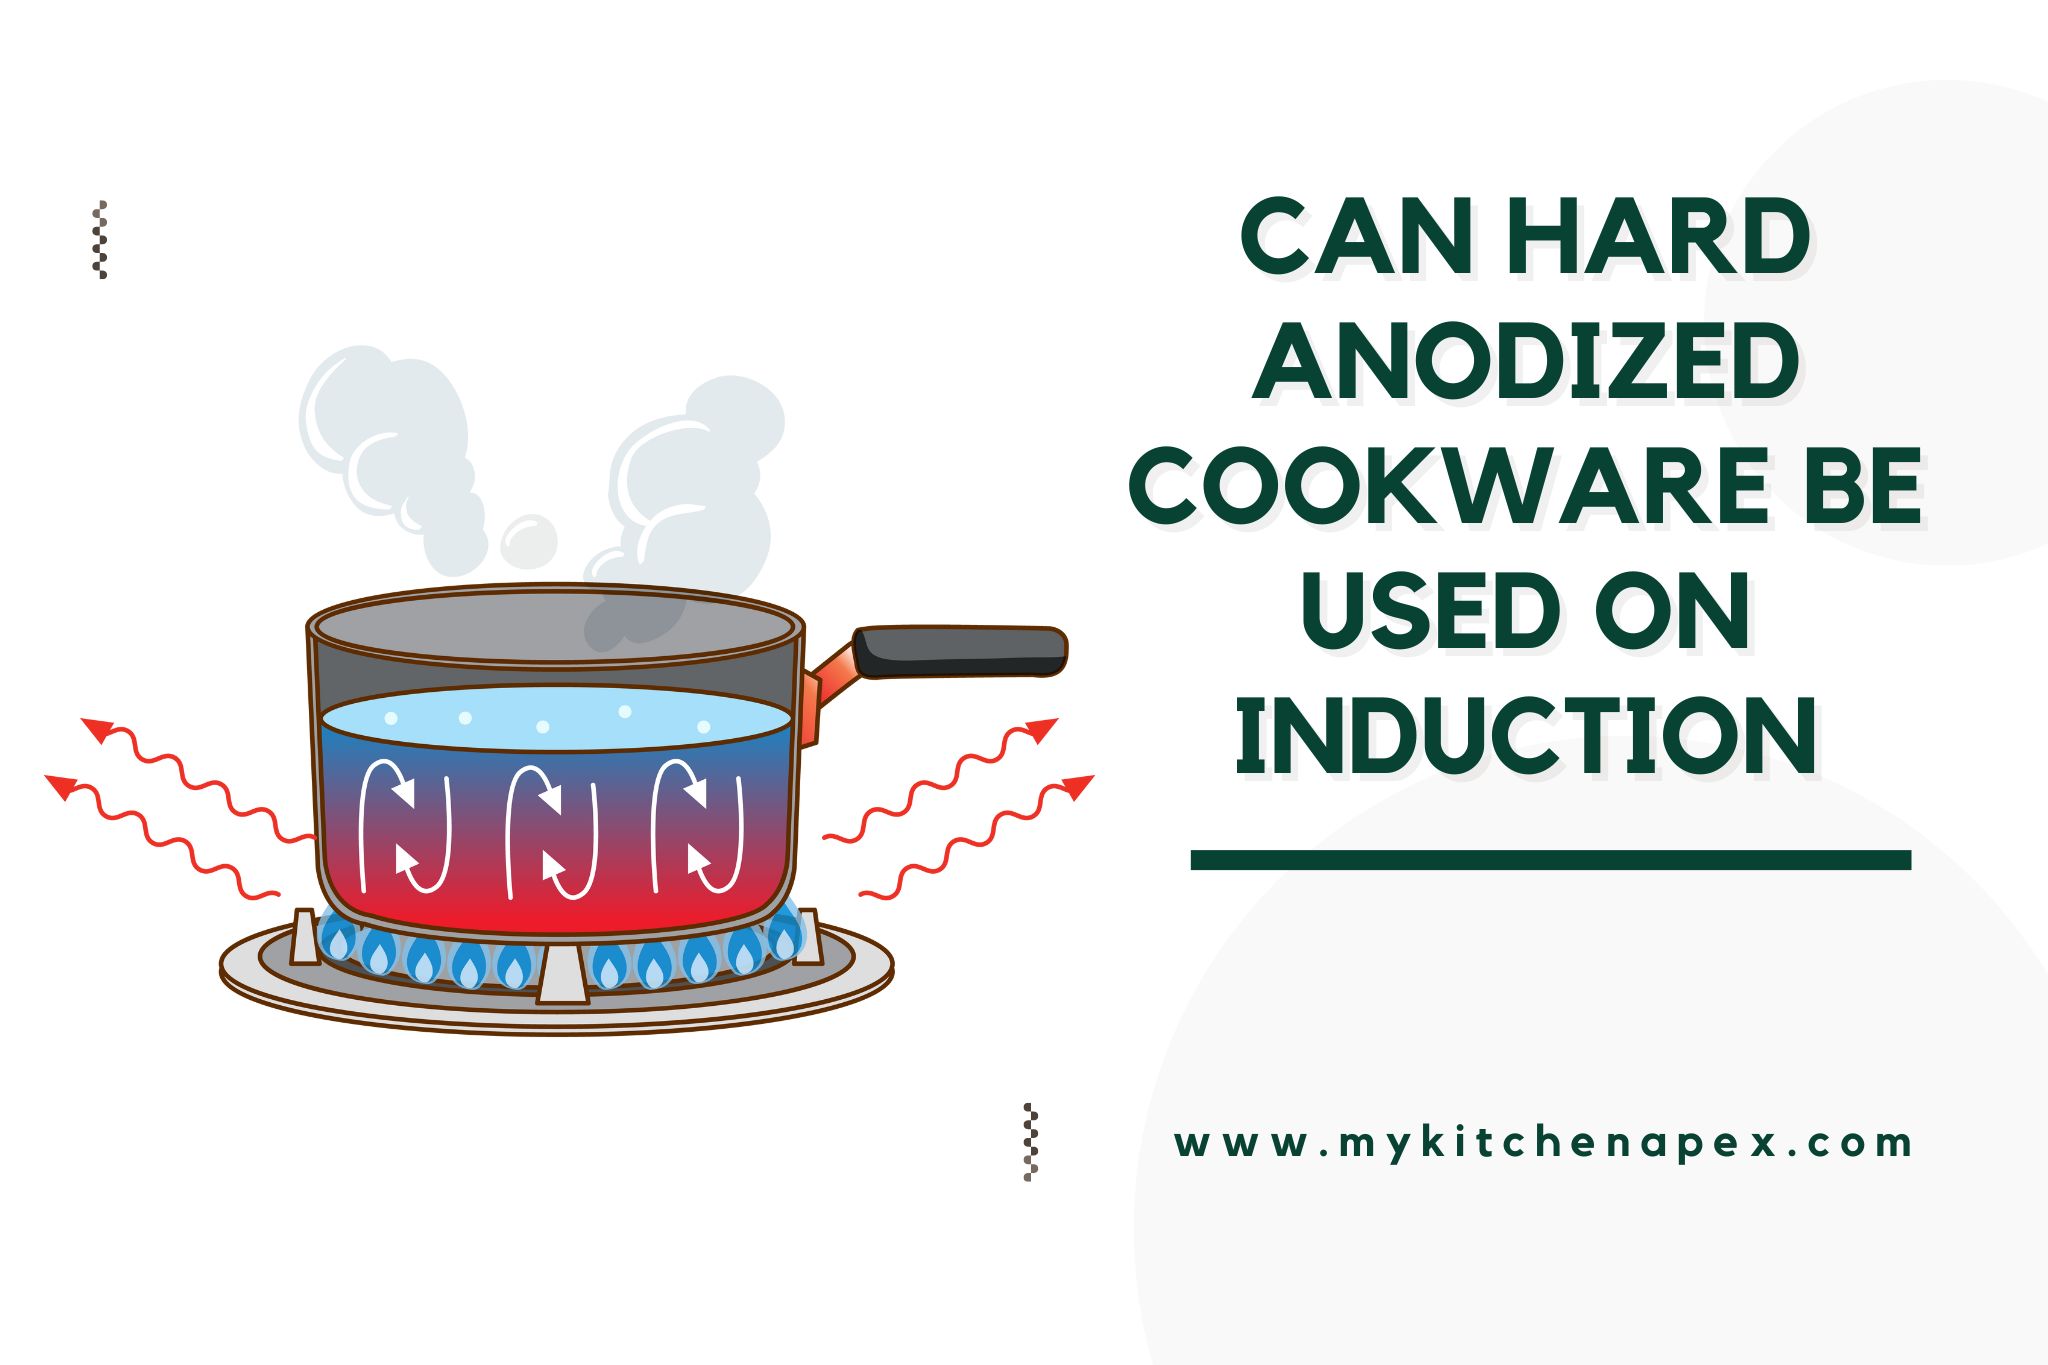 can hard anodized cookware be used on induction